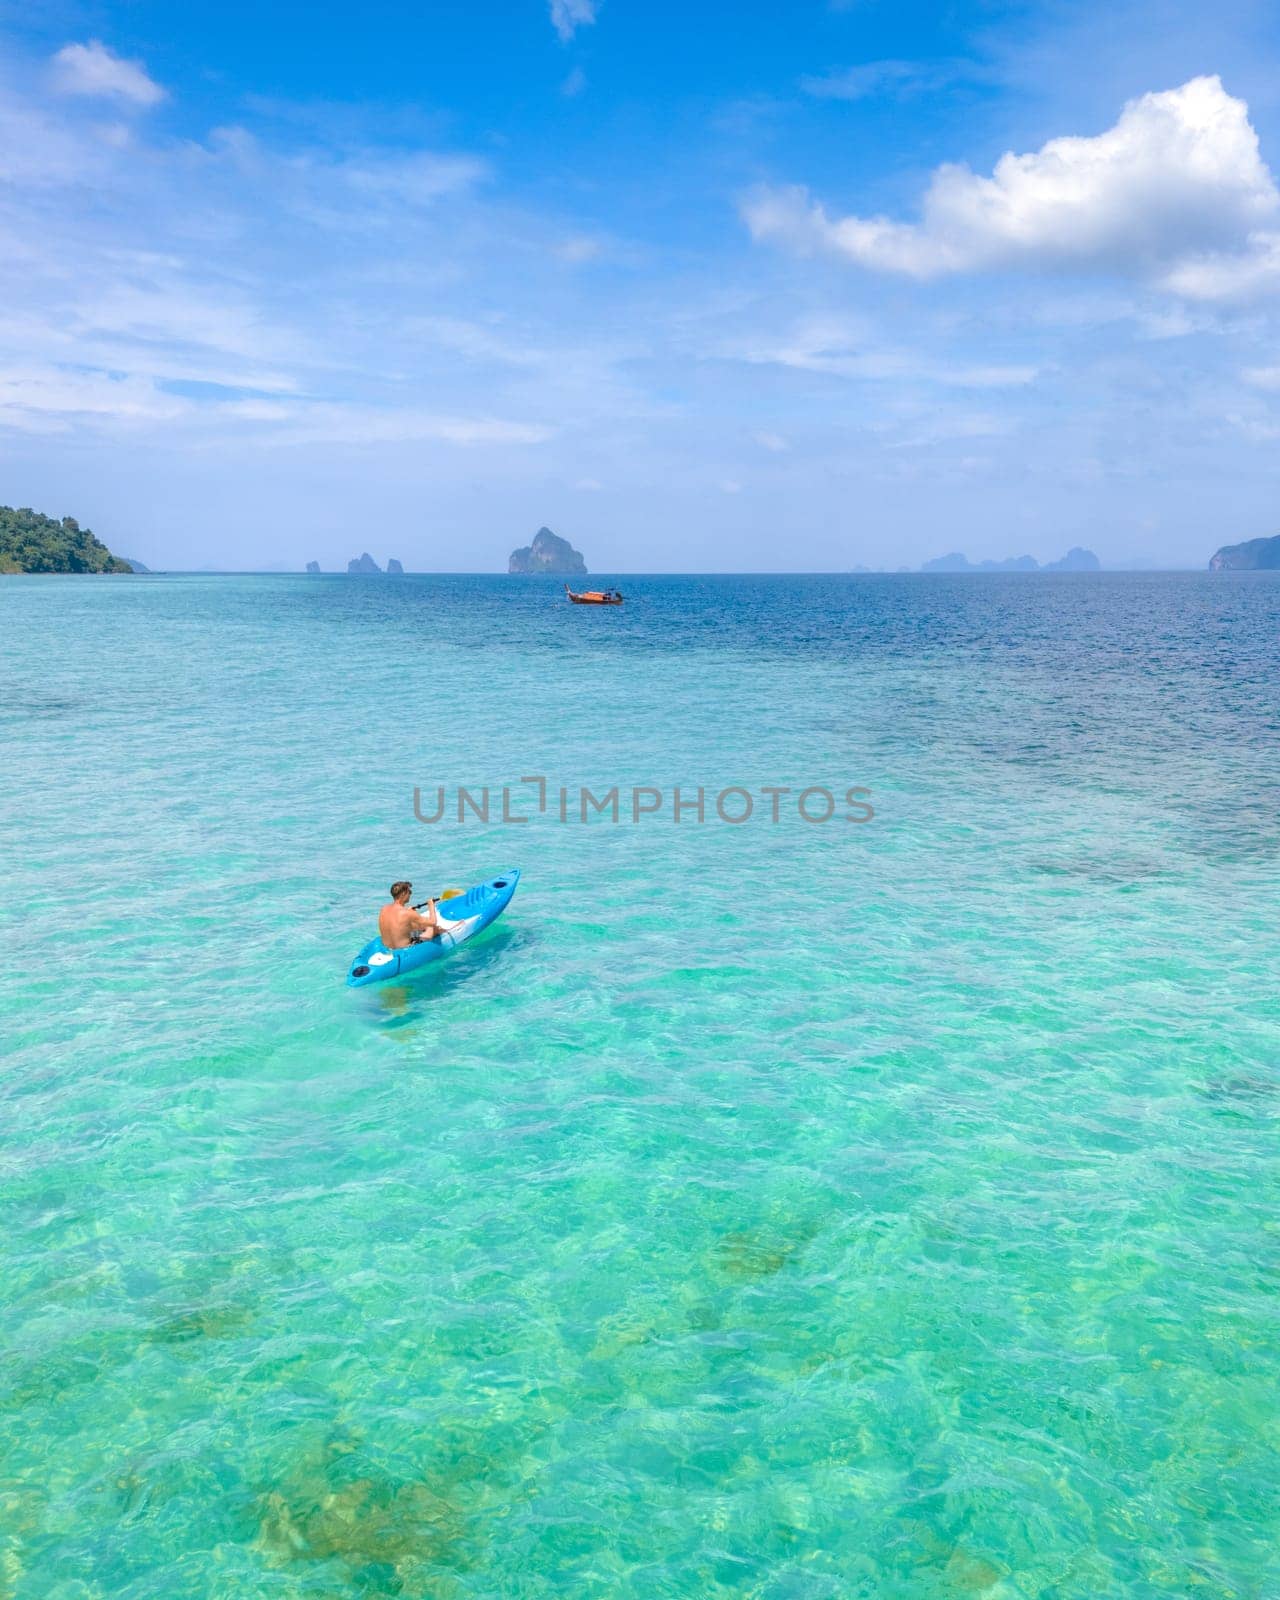 Young men in a kayak at the bleu turqouse colored ocean of Koh Kradan a tropical island with a coral reef in the ocean, Koh Kradan Trang Thailand on a sunny day with a blue sky